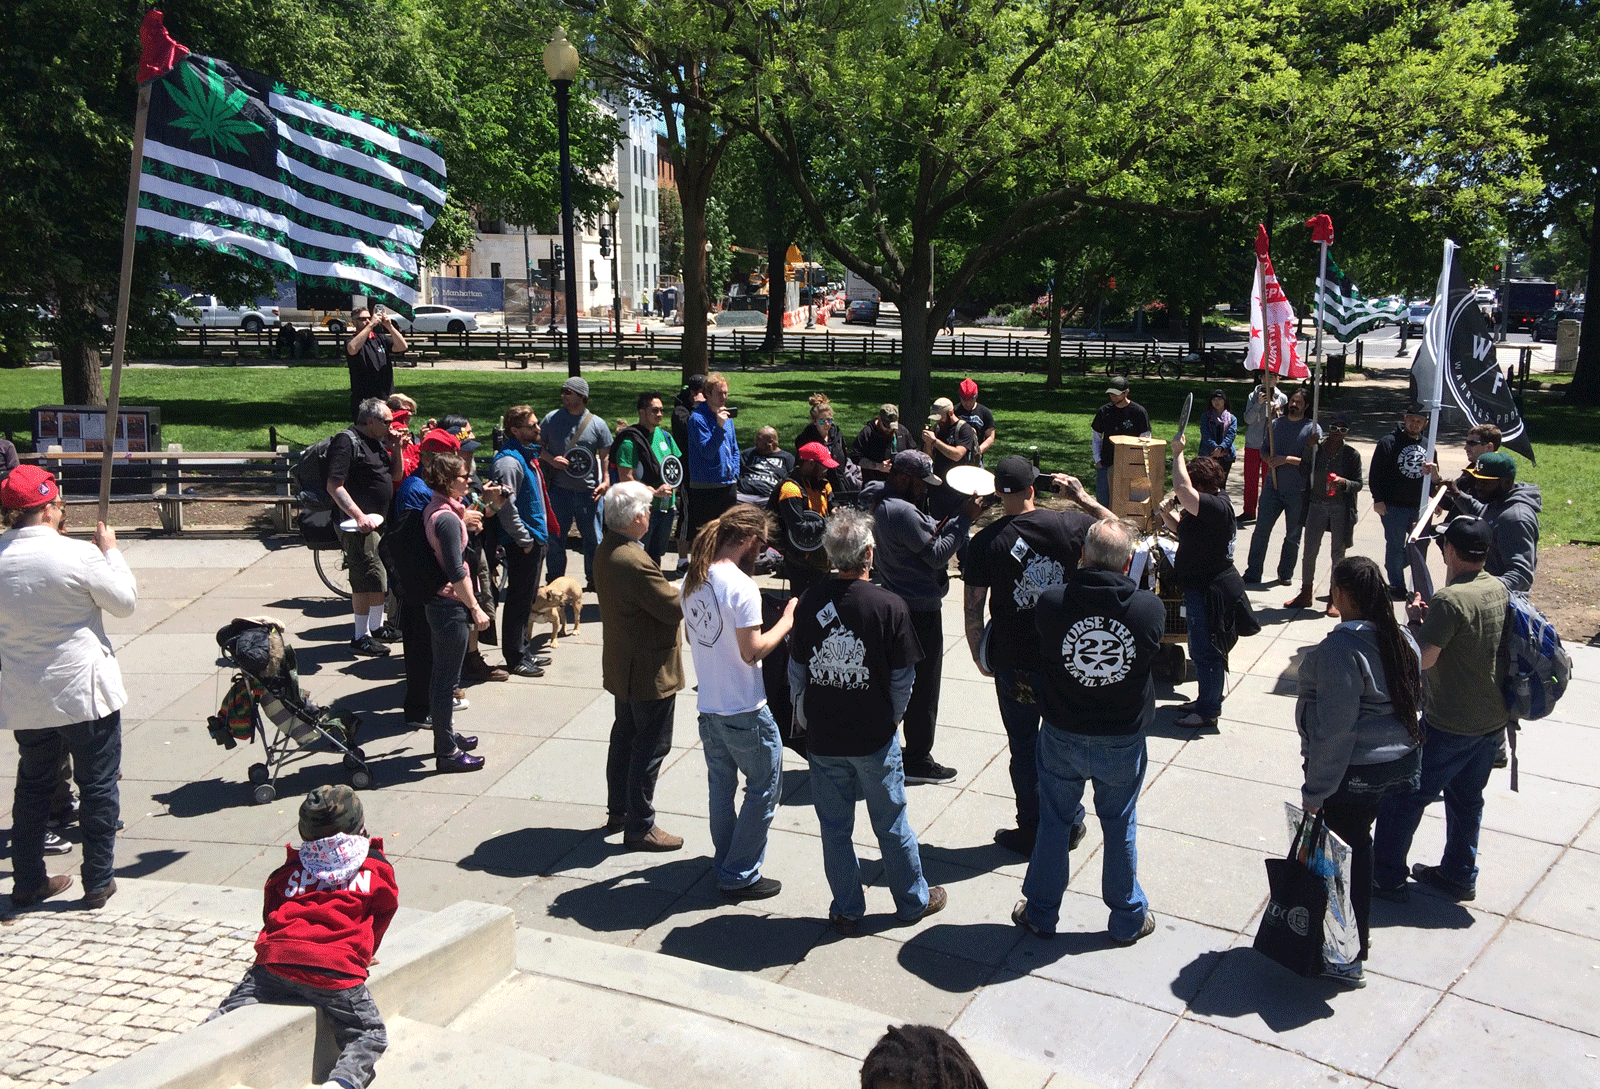 A small group of Iraq and Afghanistan War veterans gathered in Dupont Circle Monday afternoon in a rally aimed at changing vets' access to cannabis. (WTOP/Dick Uliano)